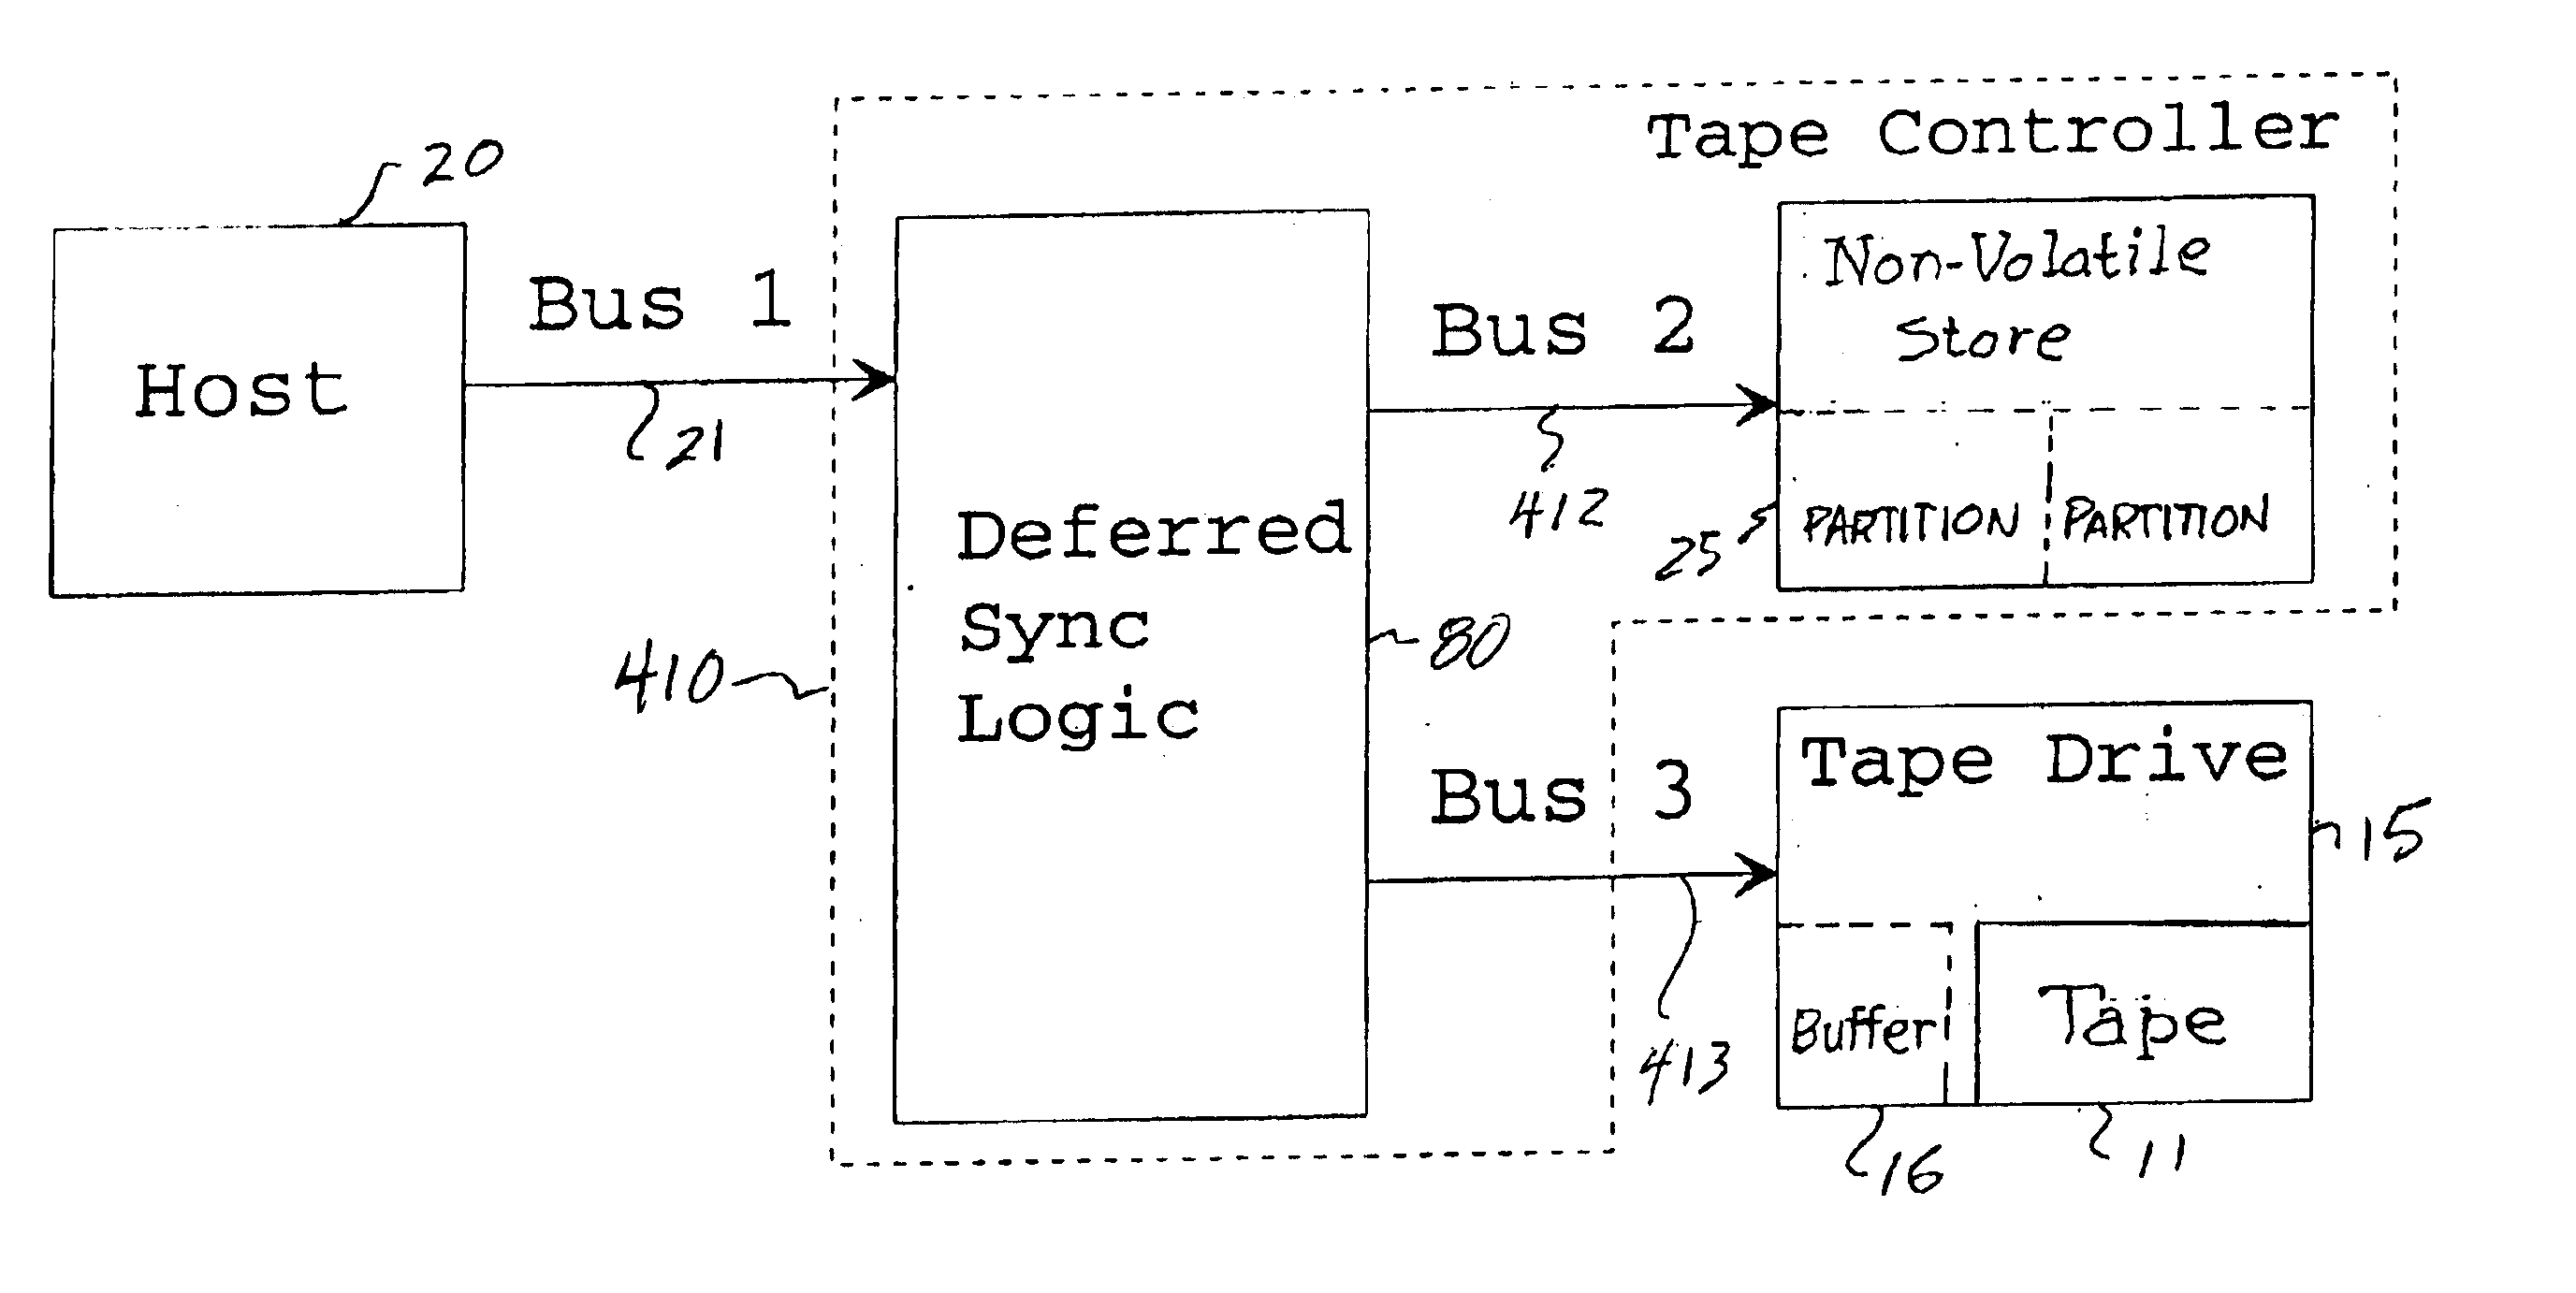 Deferred writing of data to be synchronized on magnetic tape employing a non-volatile store